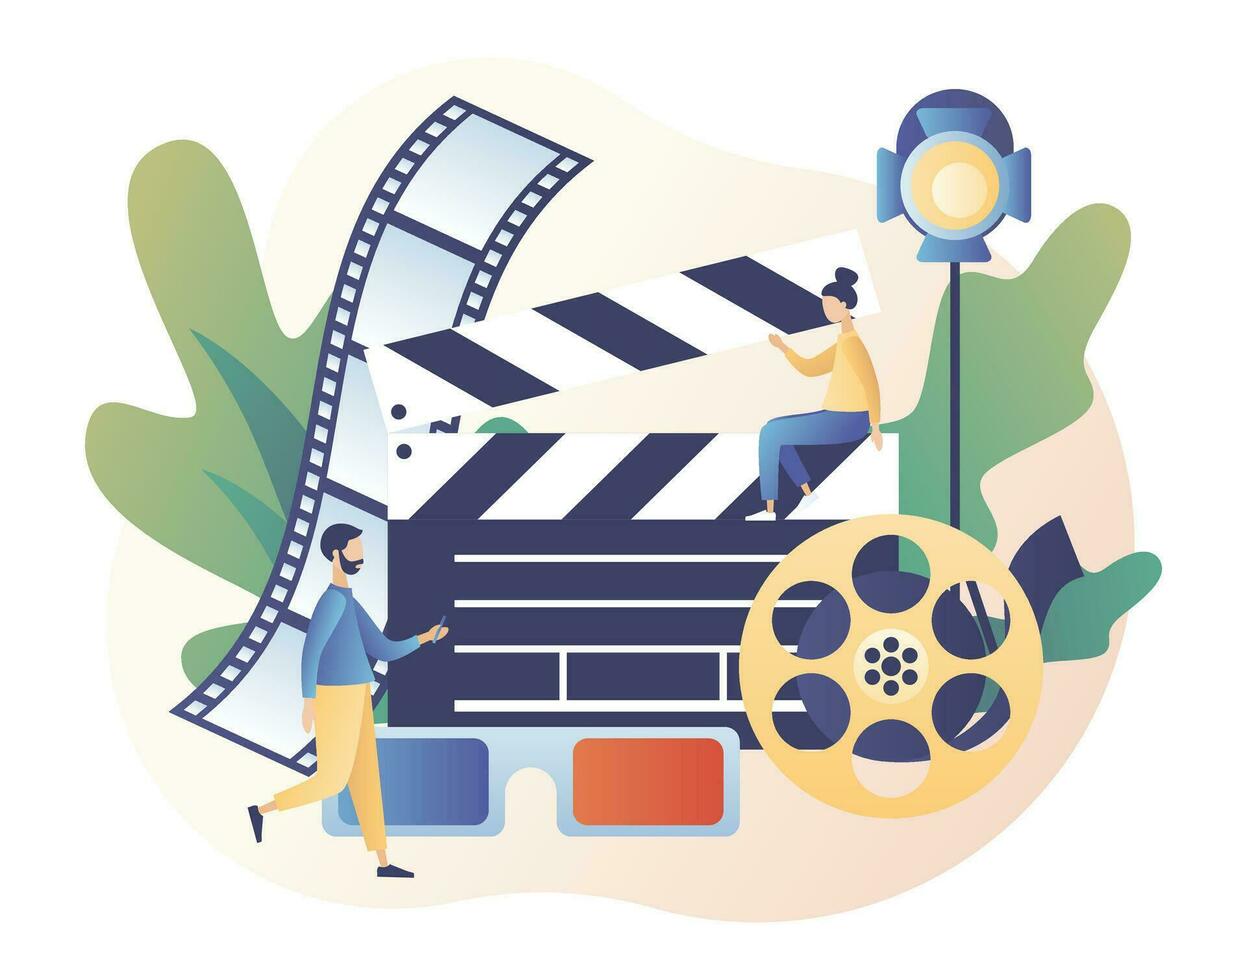 Online cinema concept. Mobile movie theater. Tiny people watching movie with popcorn,3d glasses and video attributes. Cinematography. Modern flat cartoon style. Vector illustration on white background